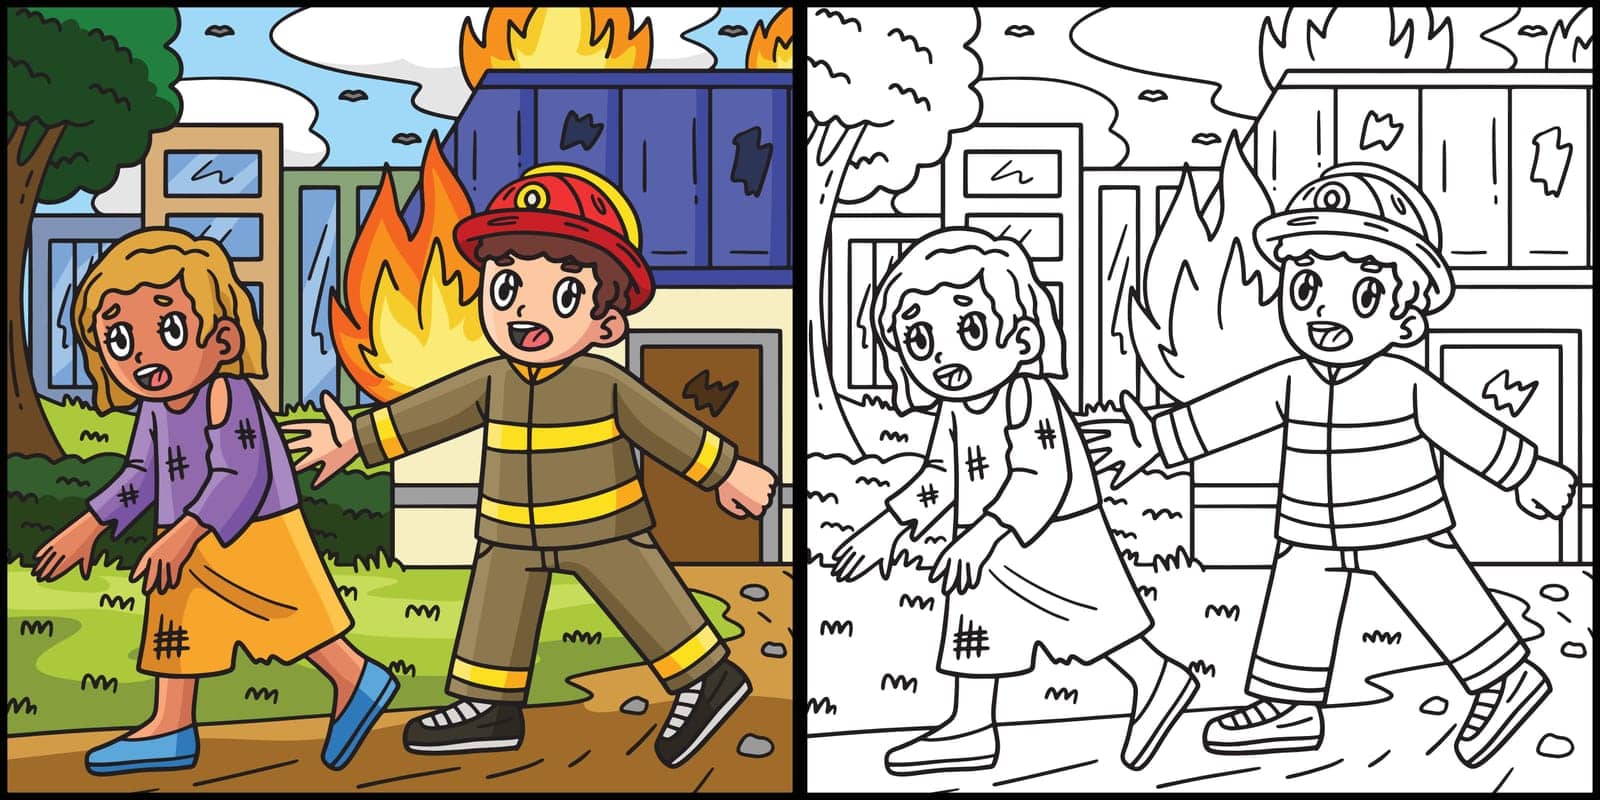 This coloring page shows a Firefighter Escorting a Survivor. One side of this illustration is colored and serves as an inspiration for children.